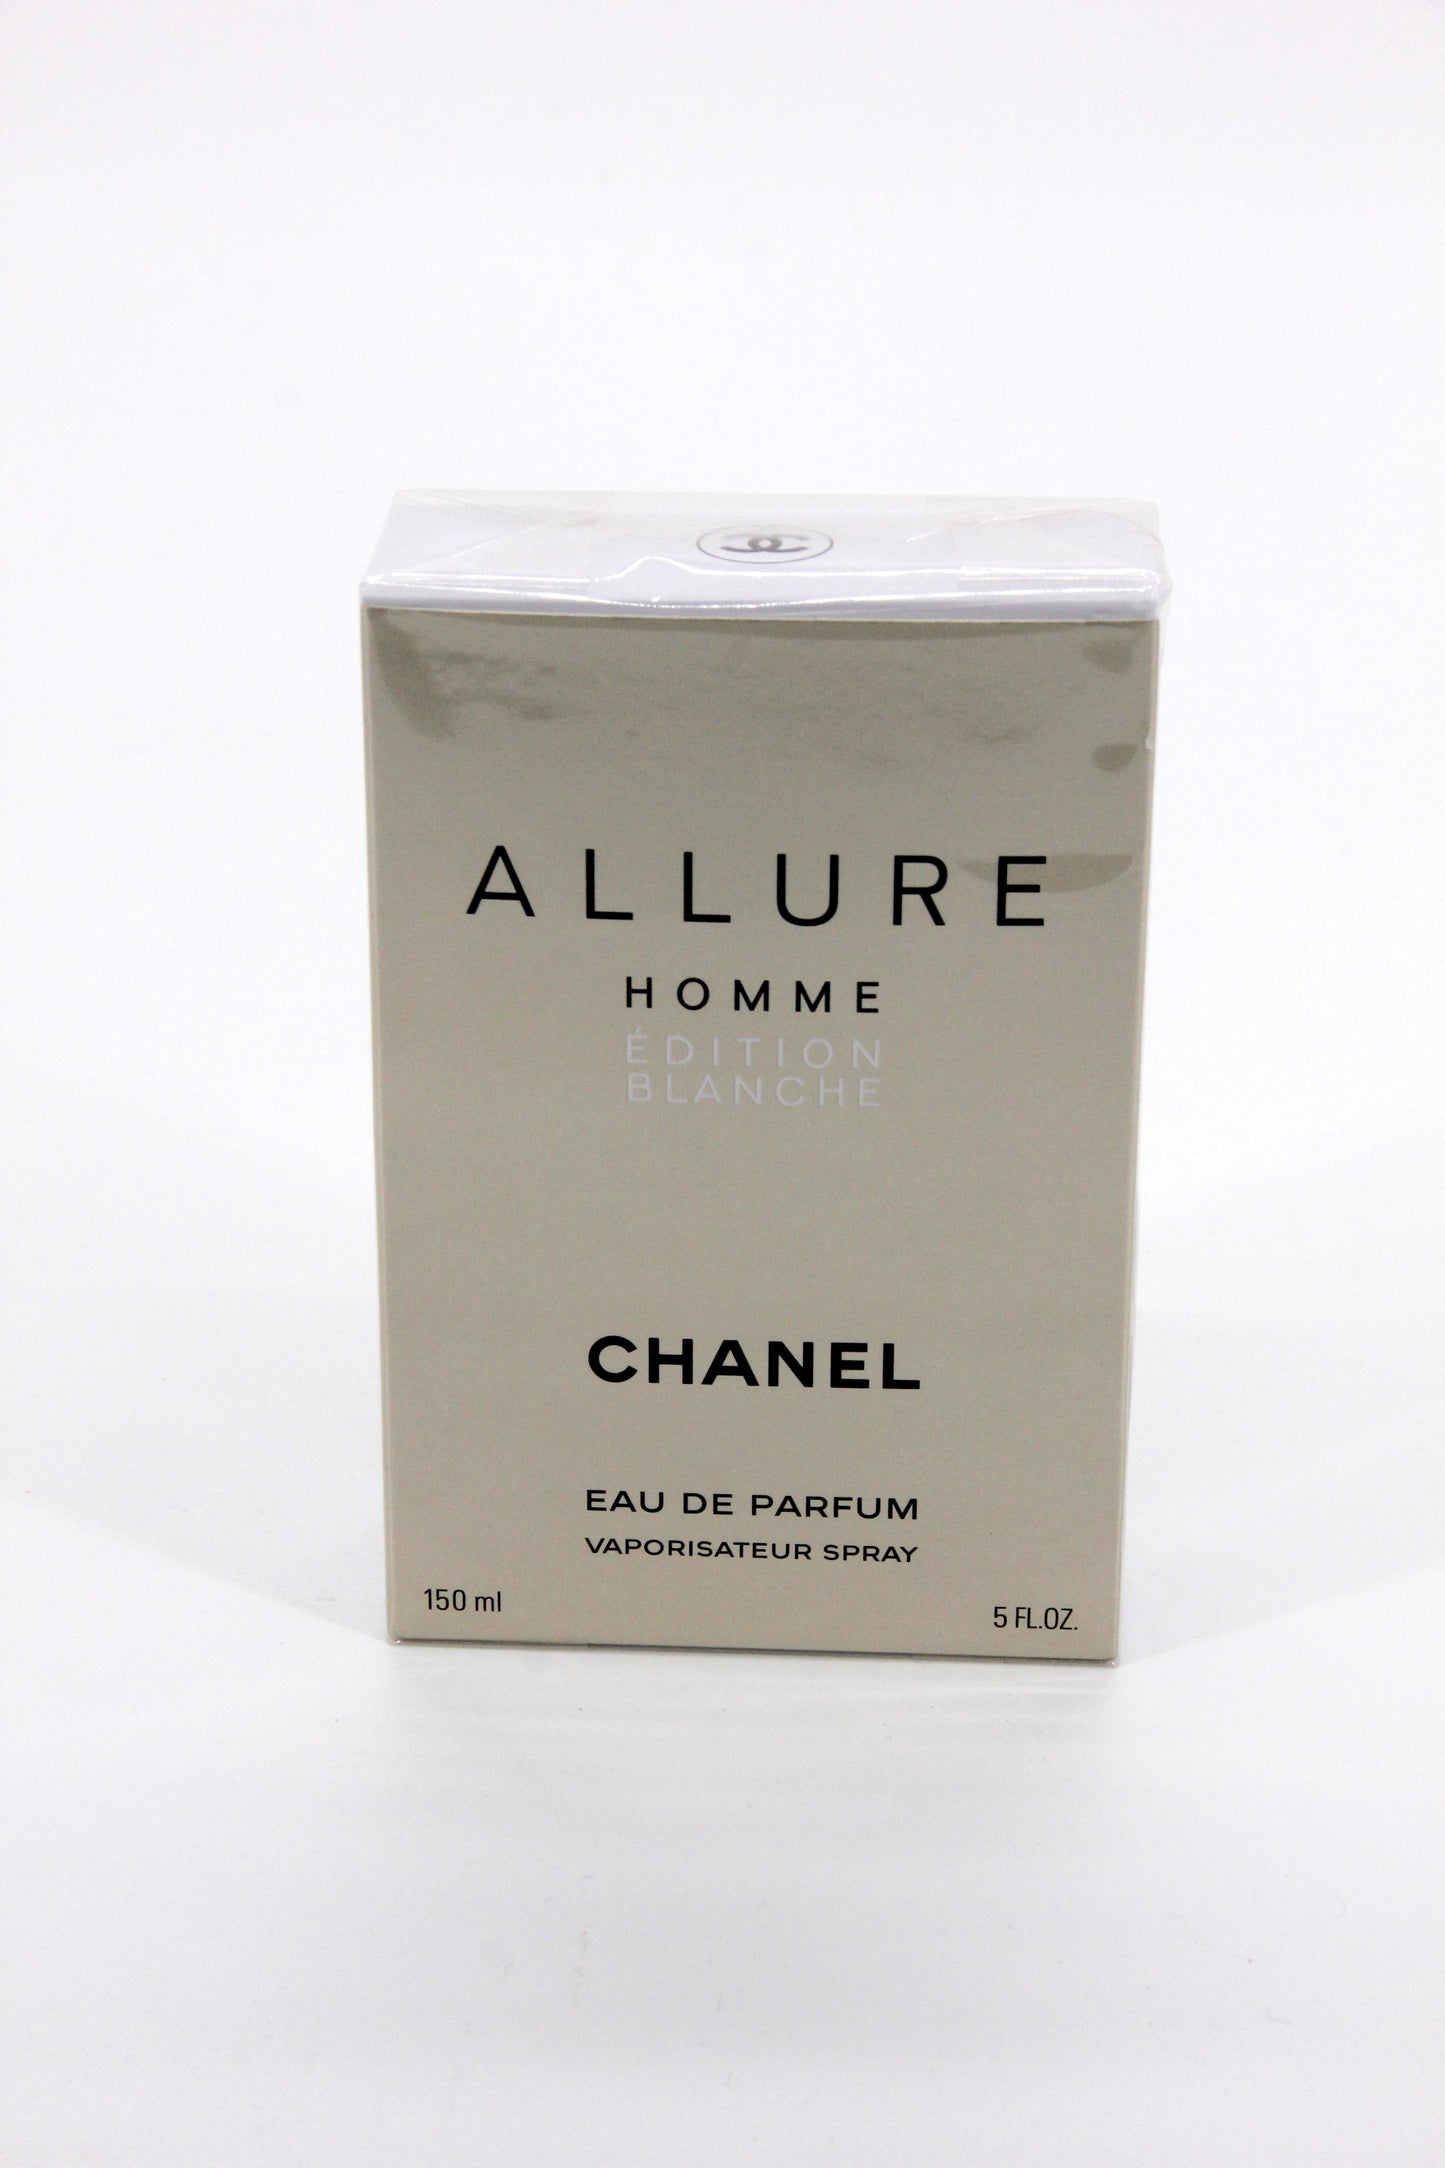 Chanel Allure Homme Edition Blanche 150ml EDP